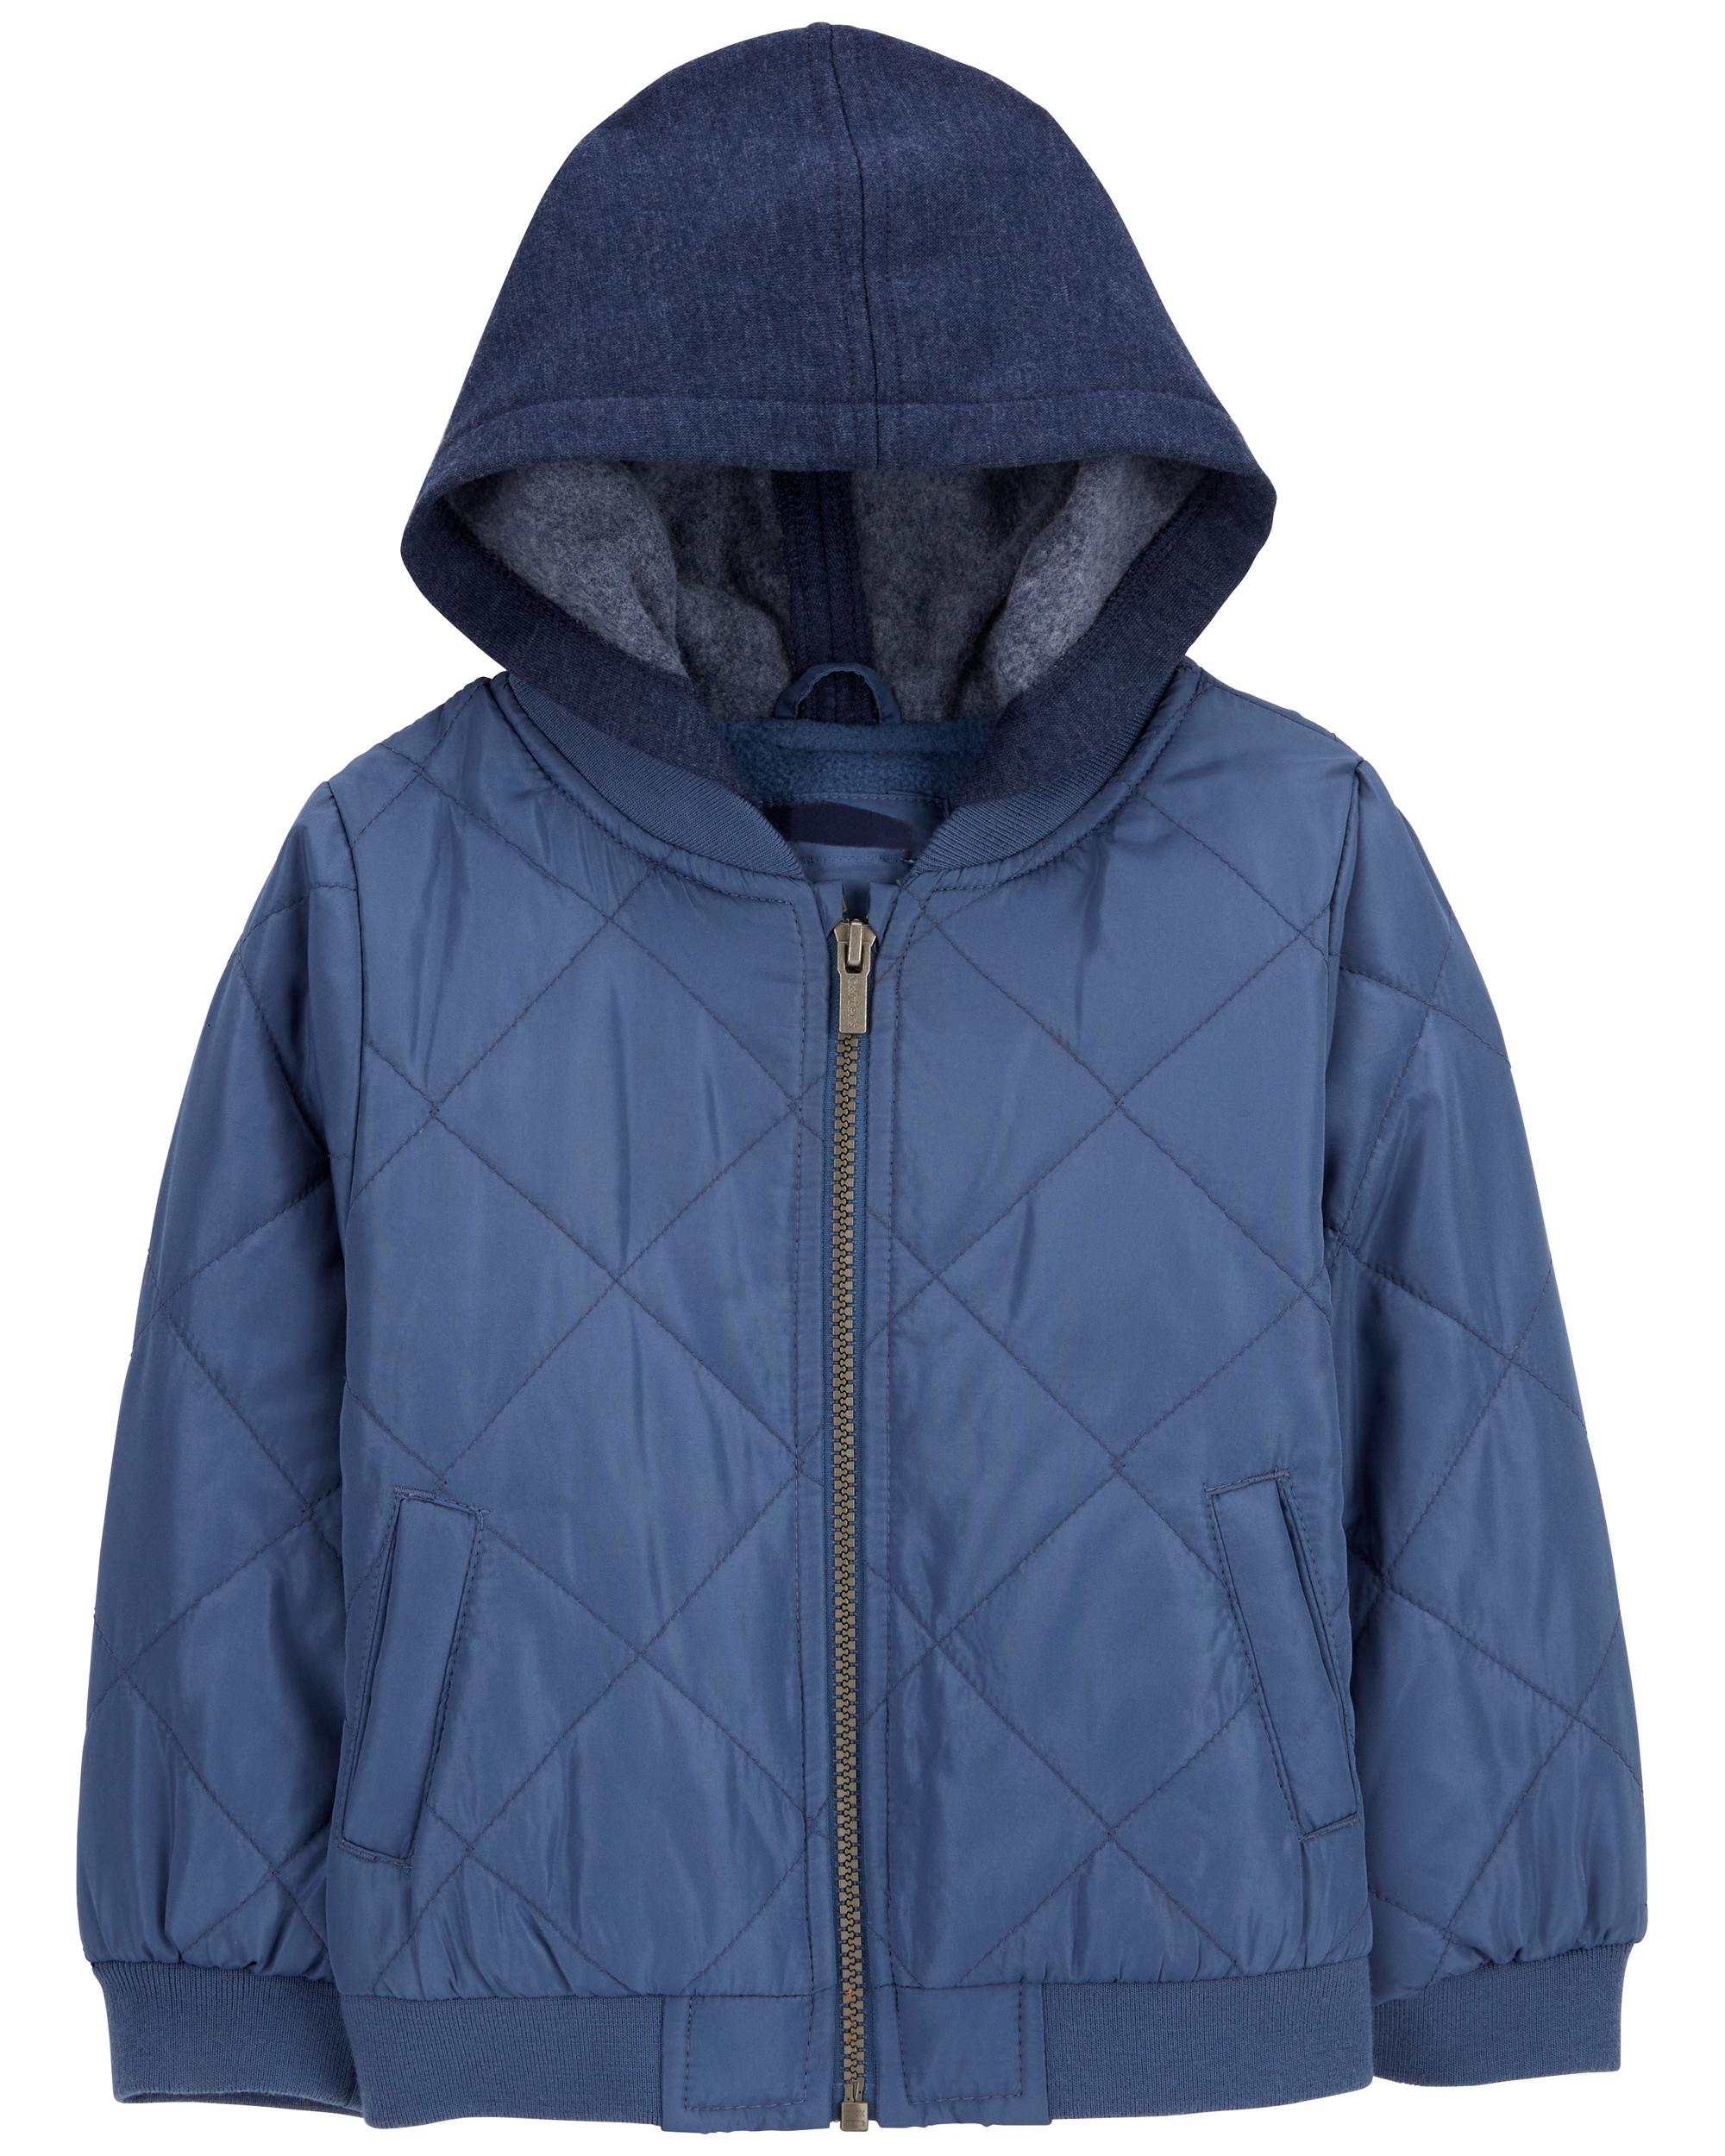 Toddler Quilted Fleece Lined Jacket